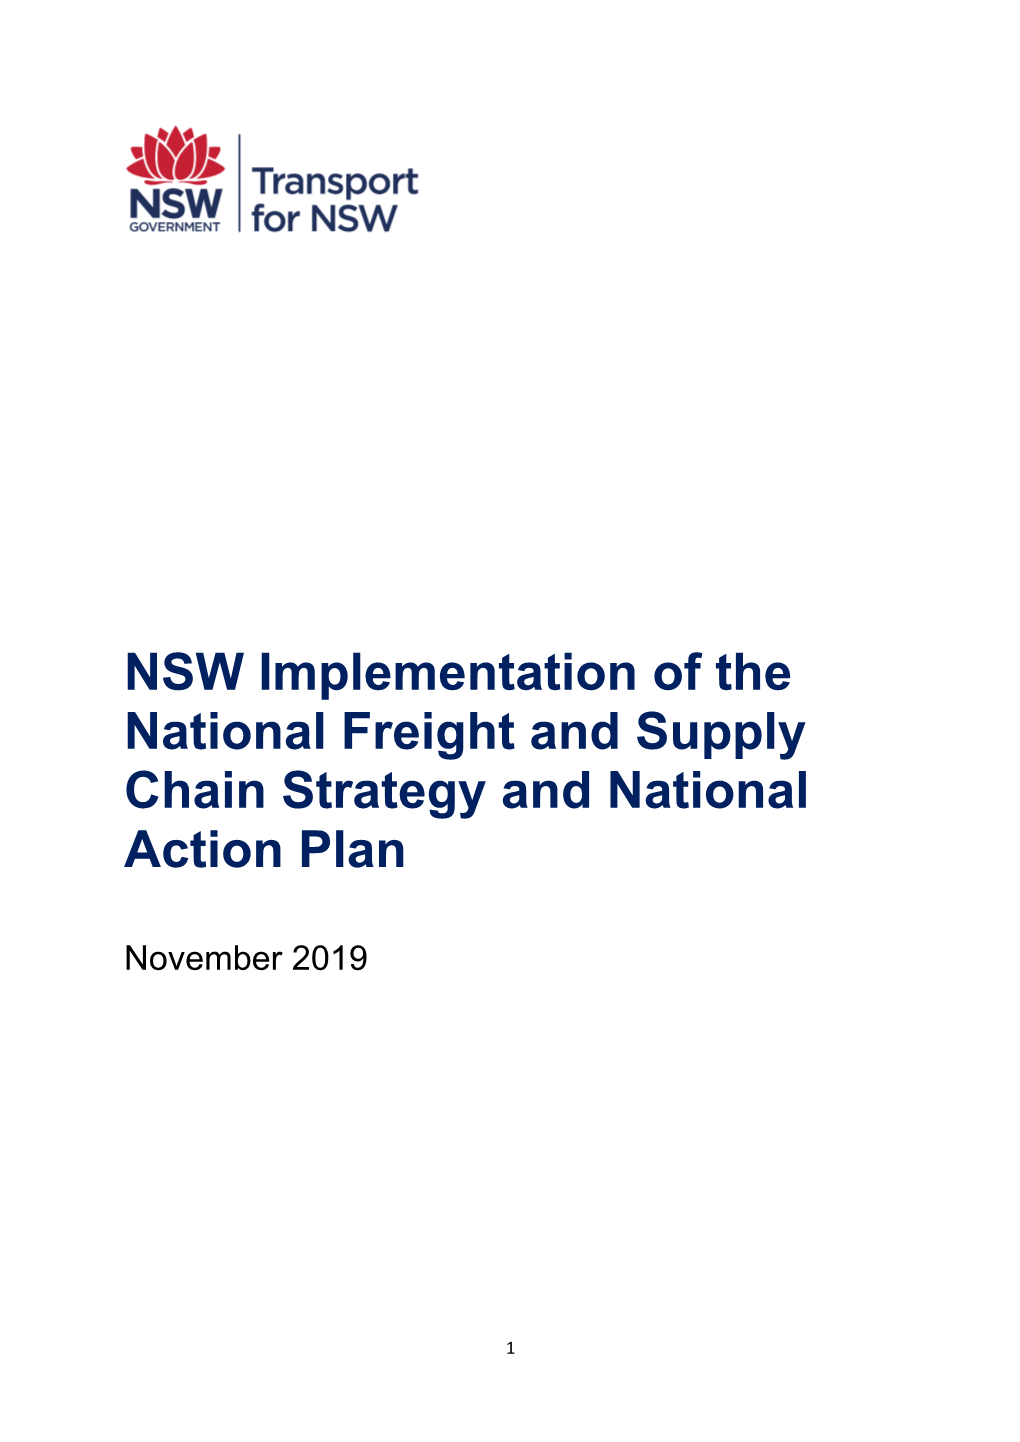 NSW Implementation of the National Freight and Supply Chain Strategy and National Action Plan